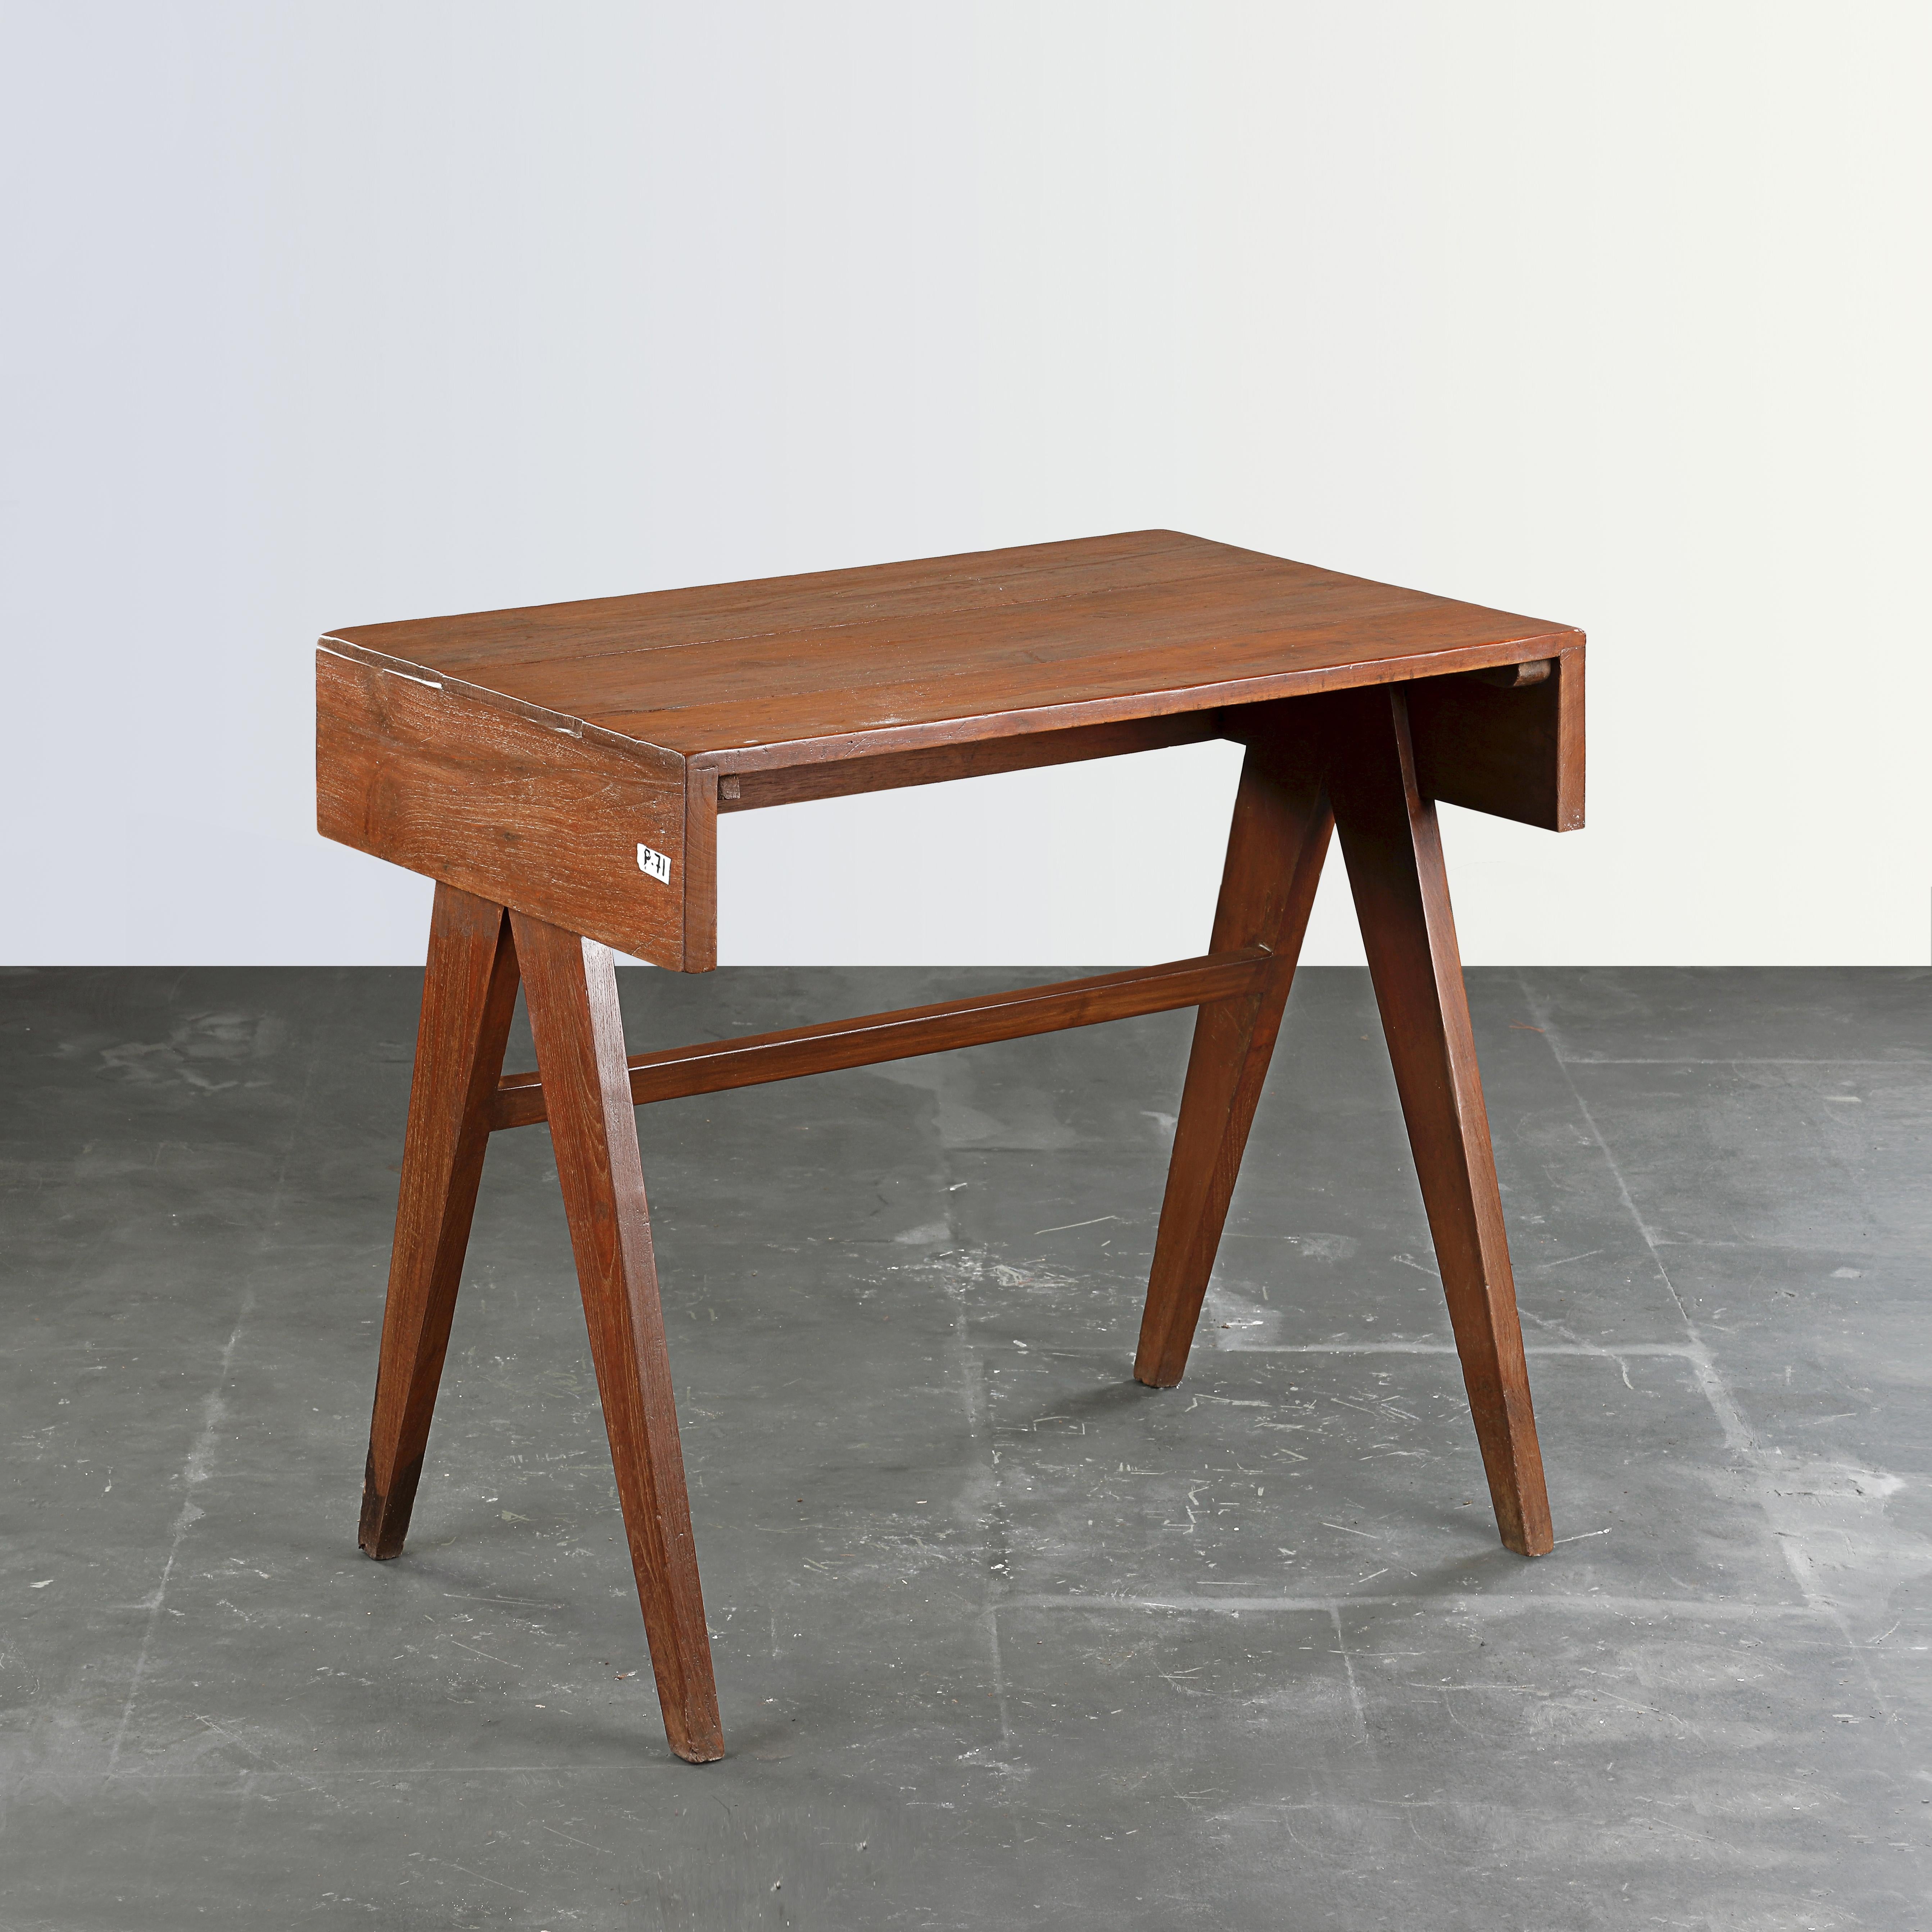 This desk is an iconic design piece. It is raw in its simplicity and it shows a slightly patinated material. Its shape is beautifully fragile and has a wonderful colour. We don't restore them too much. So we keep as much as possible of the